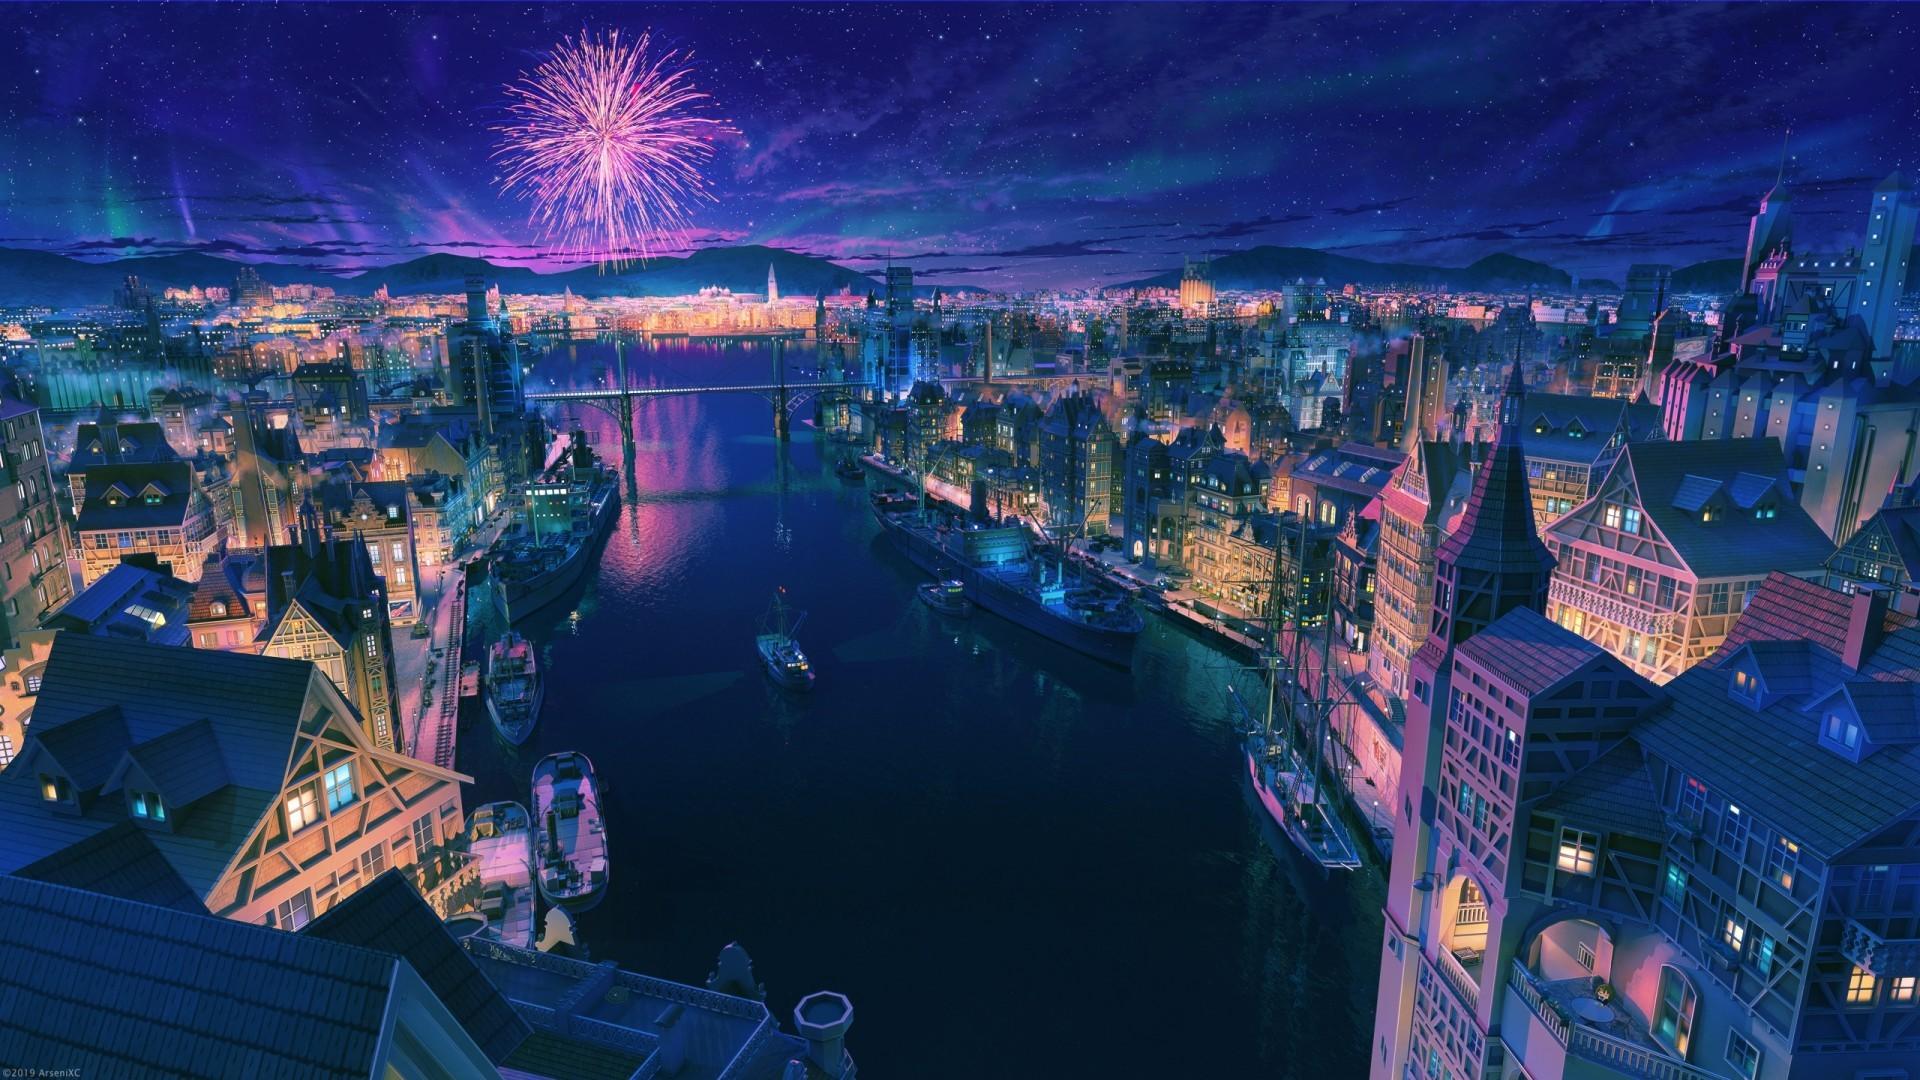 Download 1920x1080 Anime Cityscape, Night, Fireworks, Scenic